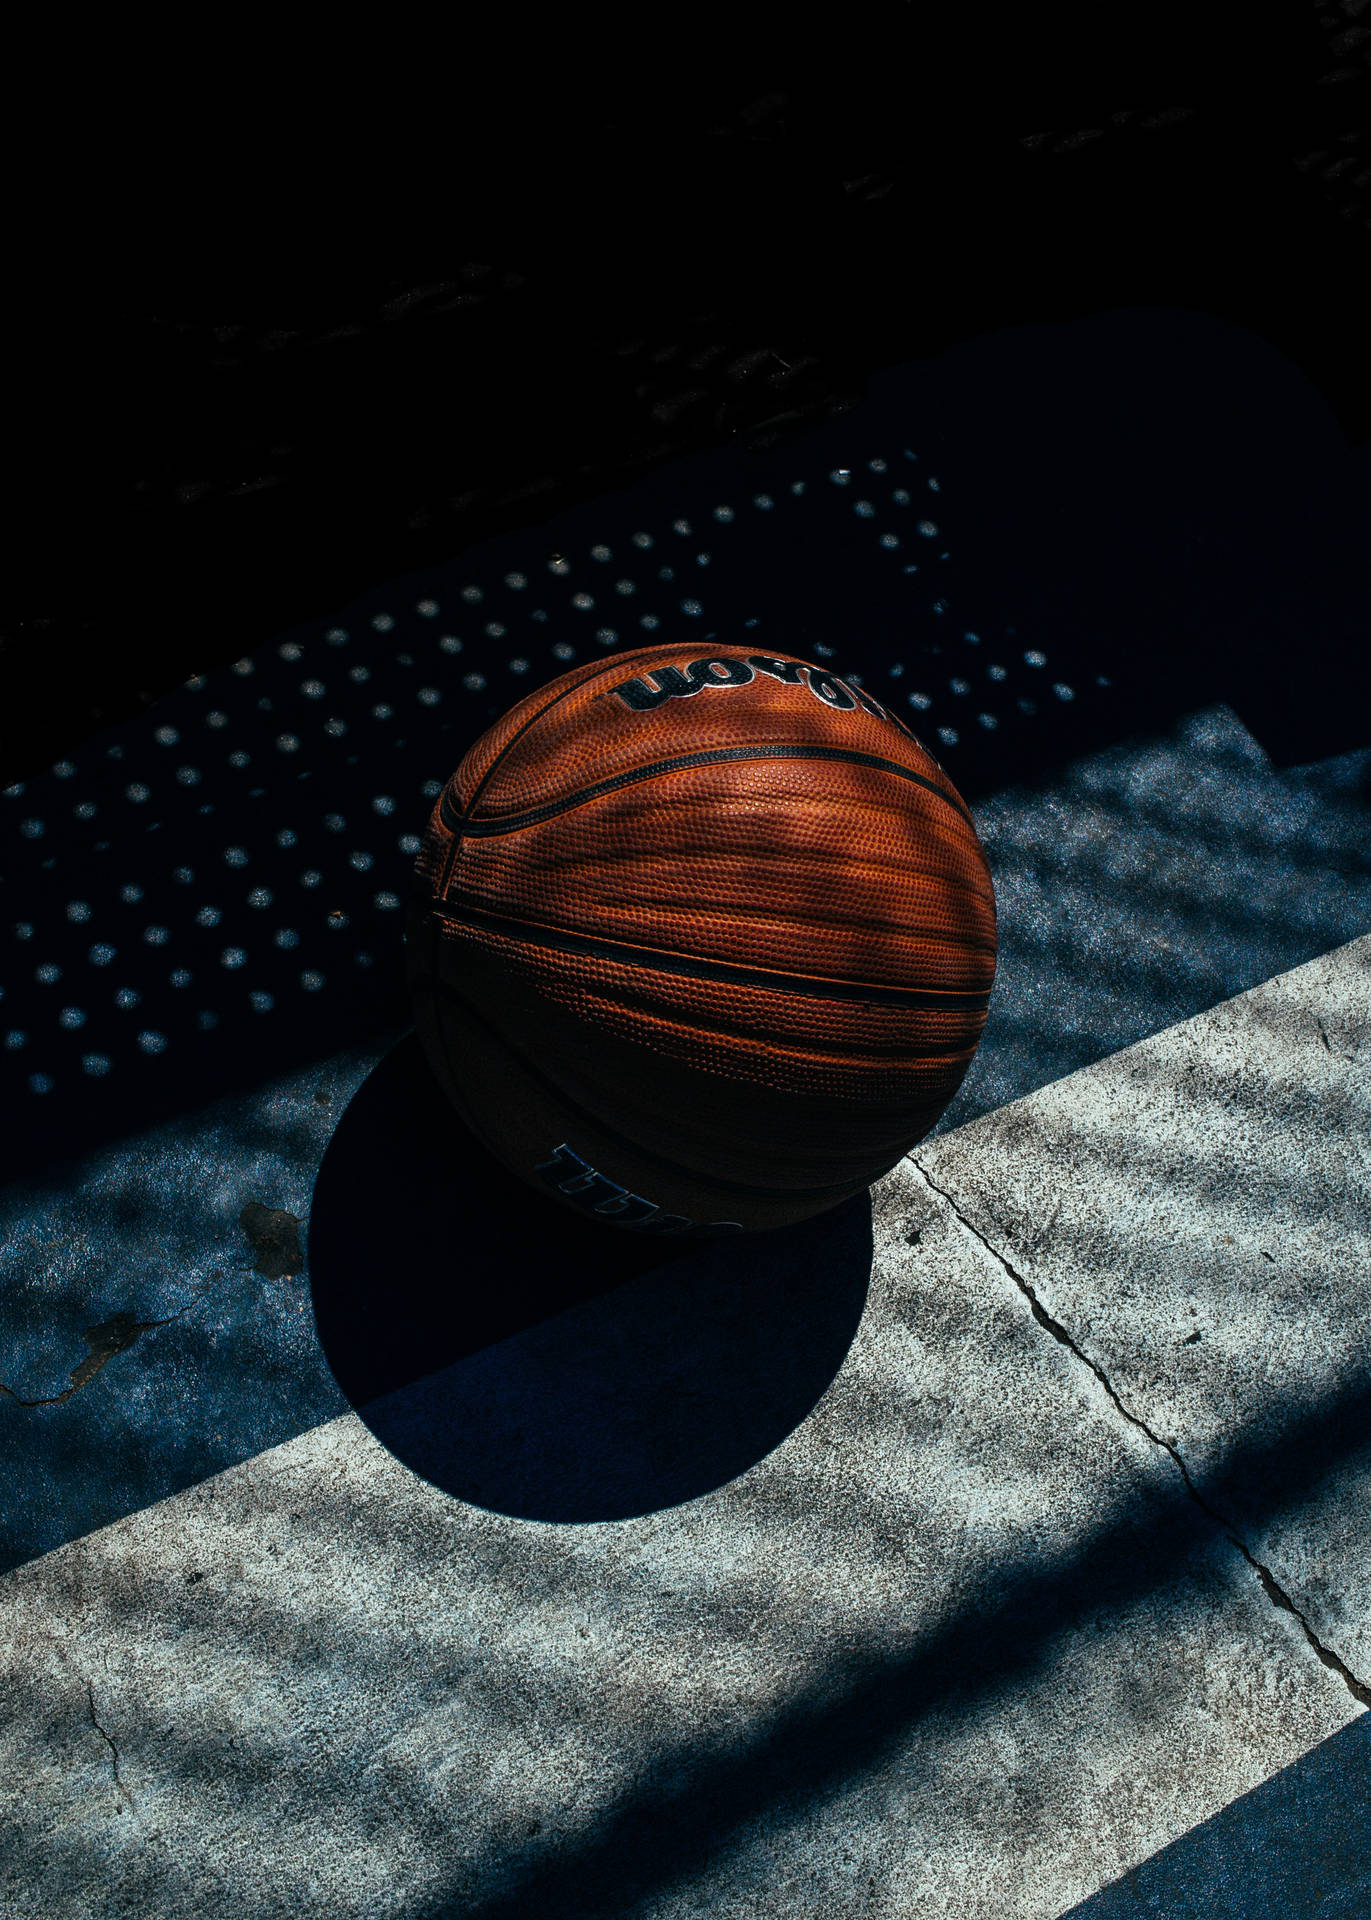 Get ready, it's time to take your basketball game to the next level! Wallpaper